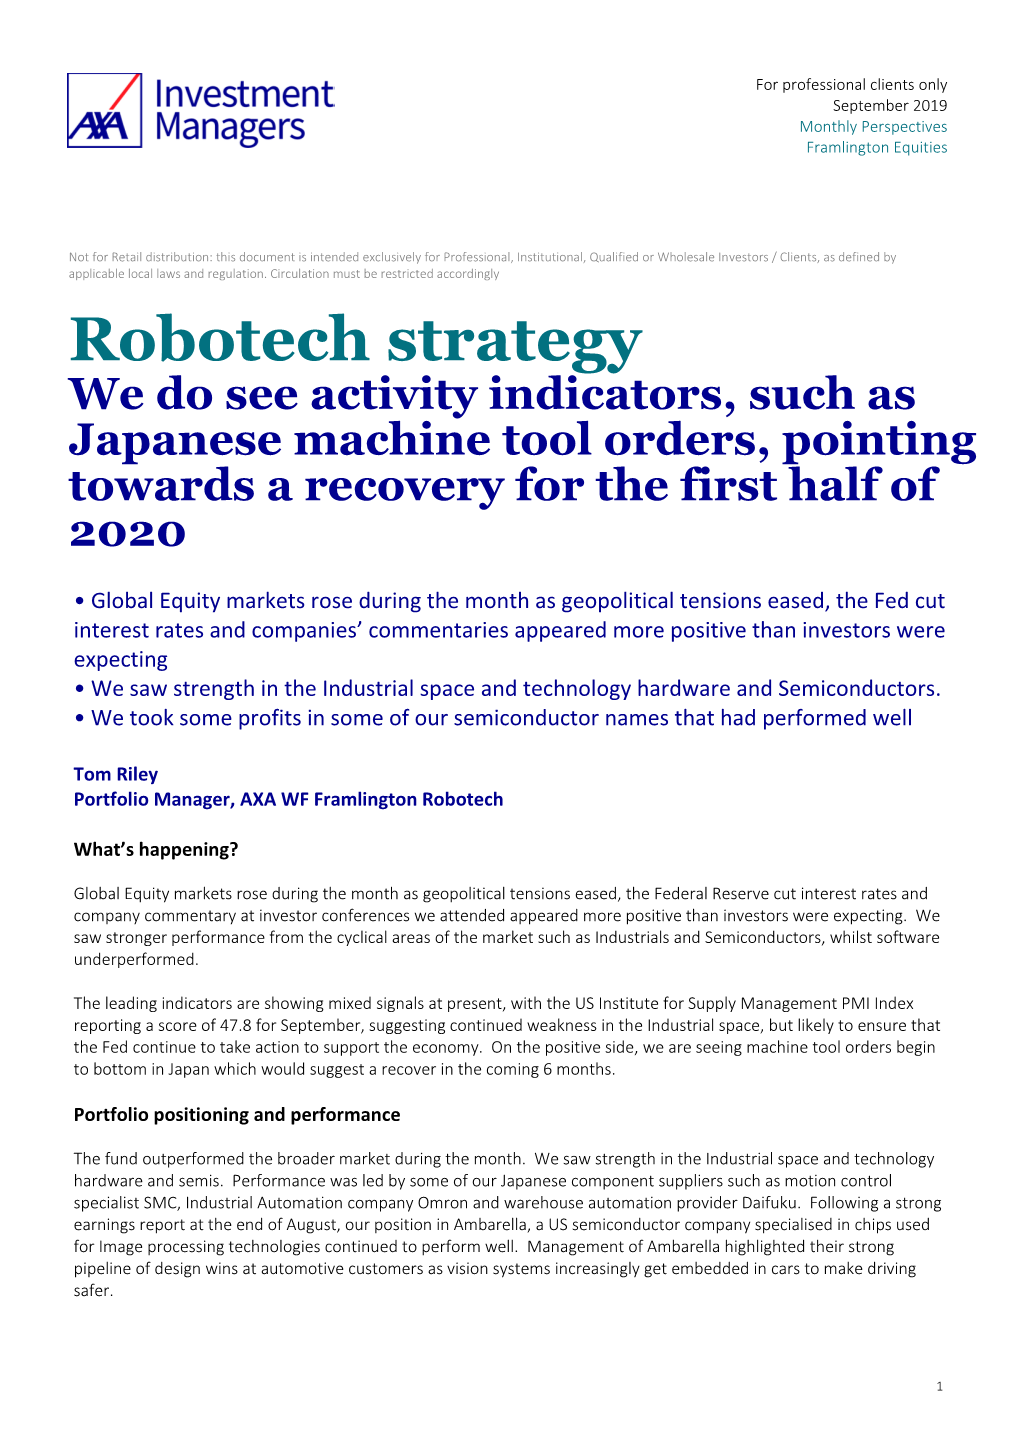 Robotech Strategy We Do See Activity Indicators, Such As Japanese Machine Tool Orders, Pointing Towards a Recovery for the First Half of 2020